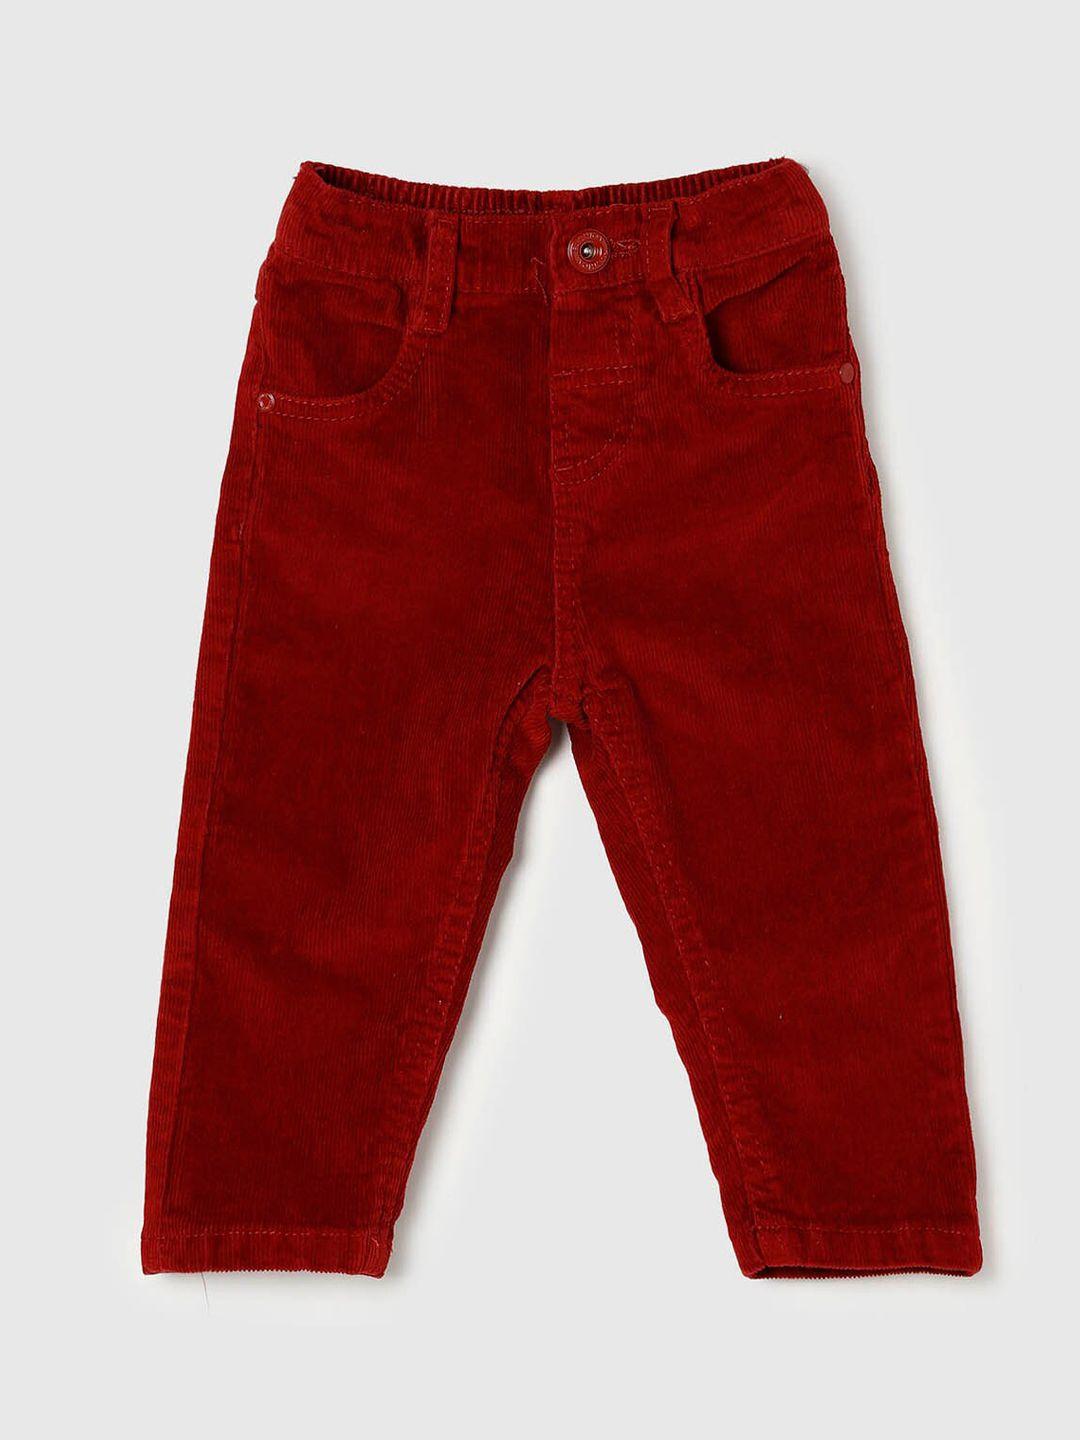 max-boys-red-solid-cotton-trousers